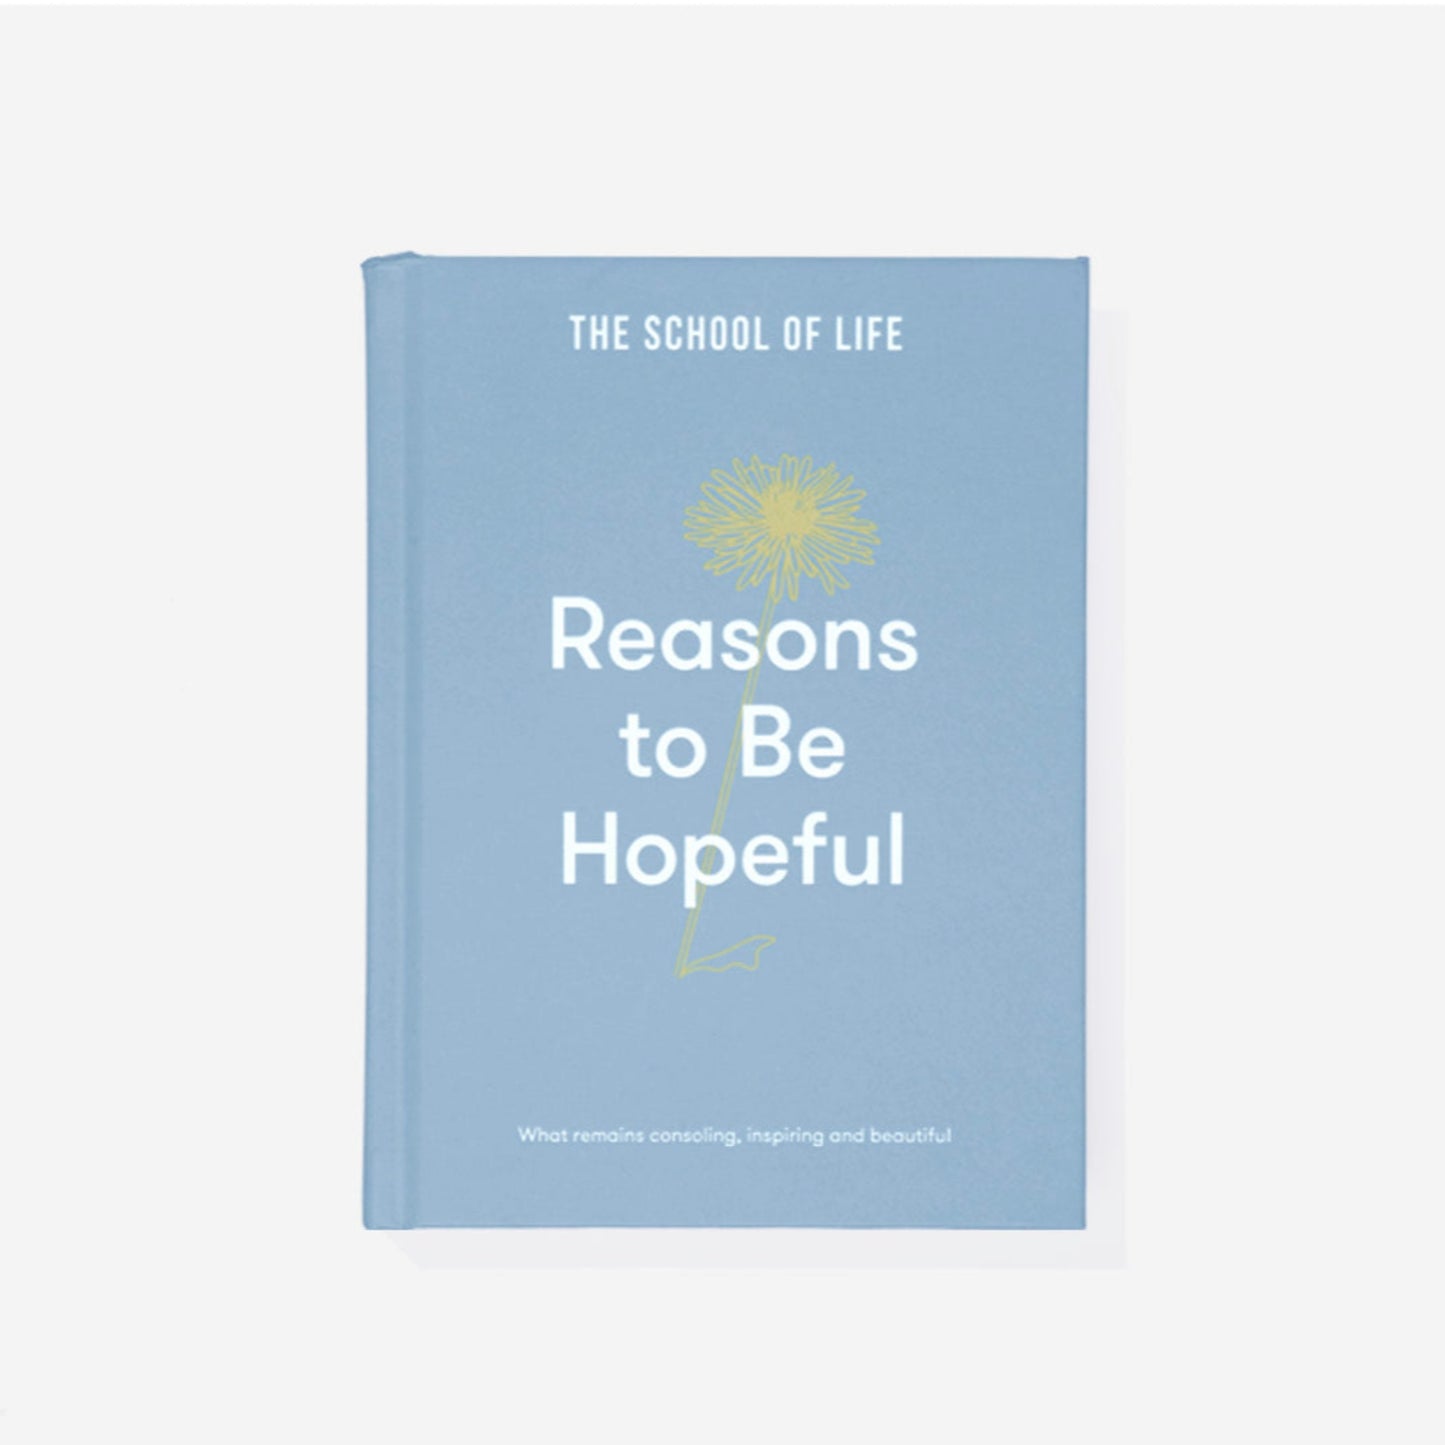 Reasons To Be Hopeful (The School of Life)